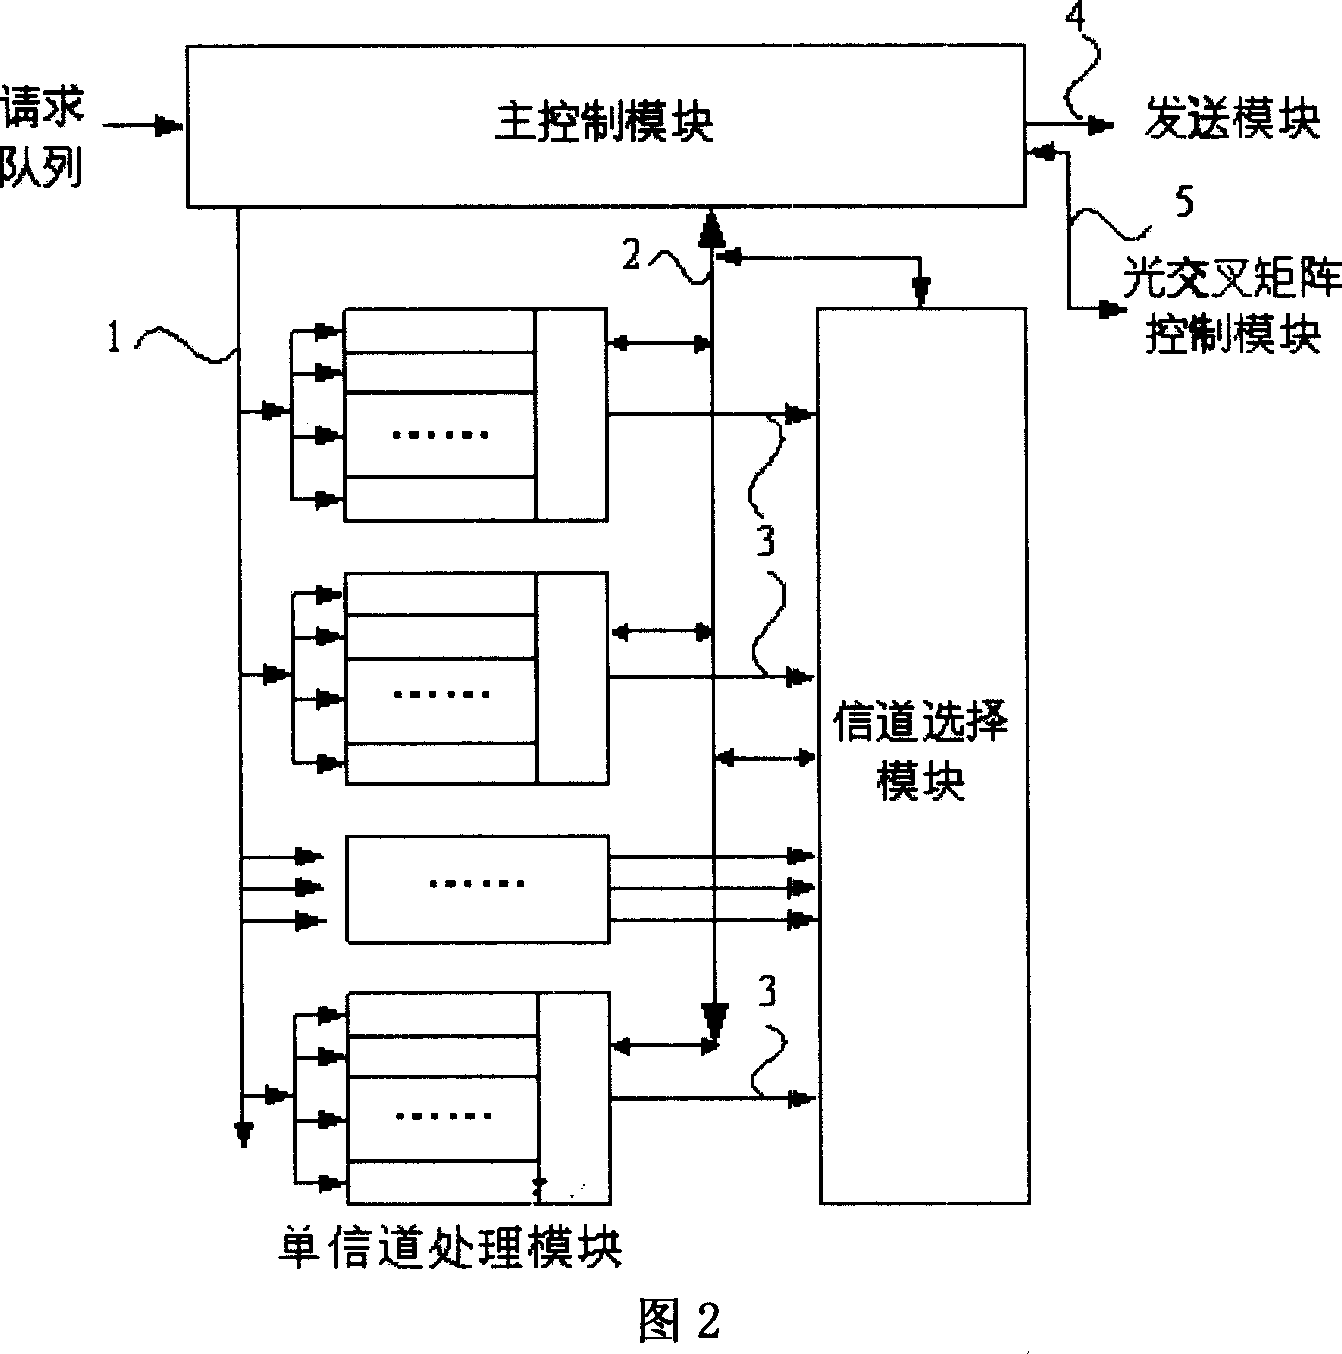 Parallel channel scheduler in the optical burst switching